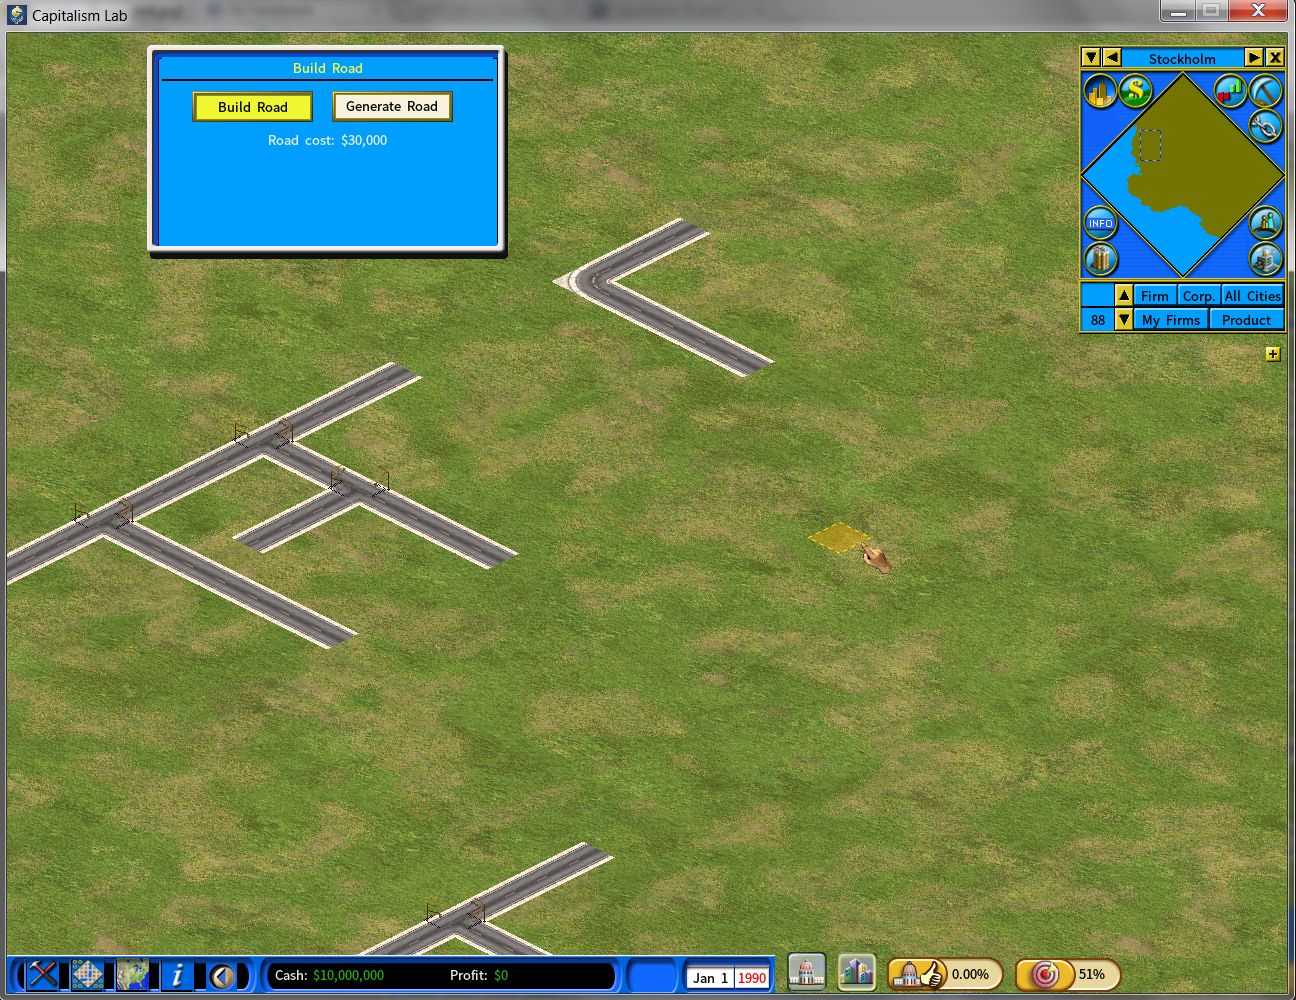 Test screenshot: the city starts without any roads and the player will be provided with a basic set of tools for laying roads.